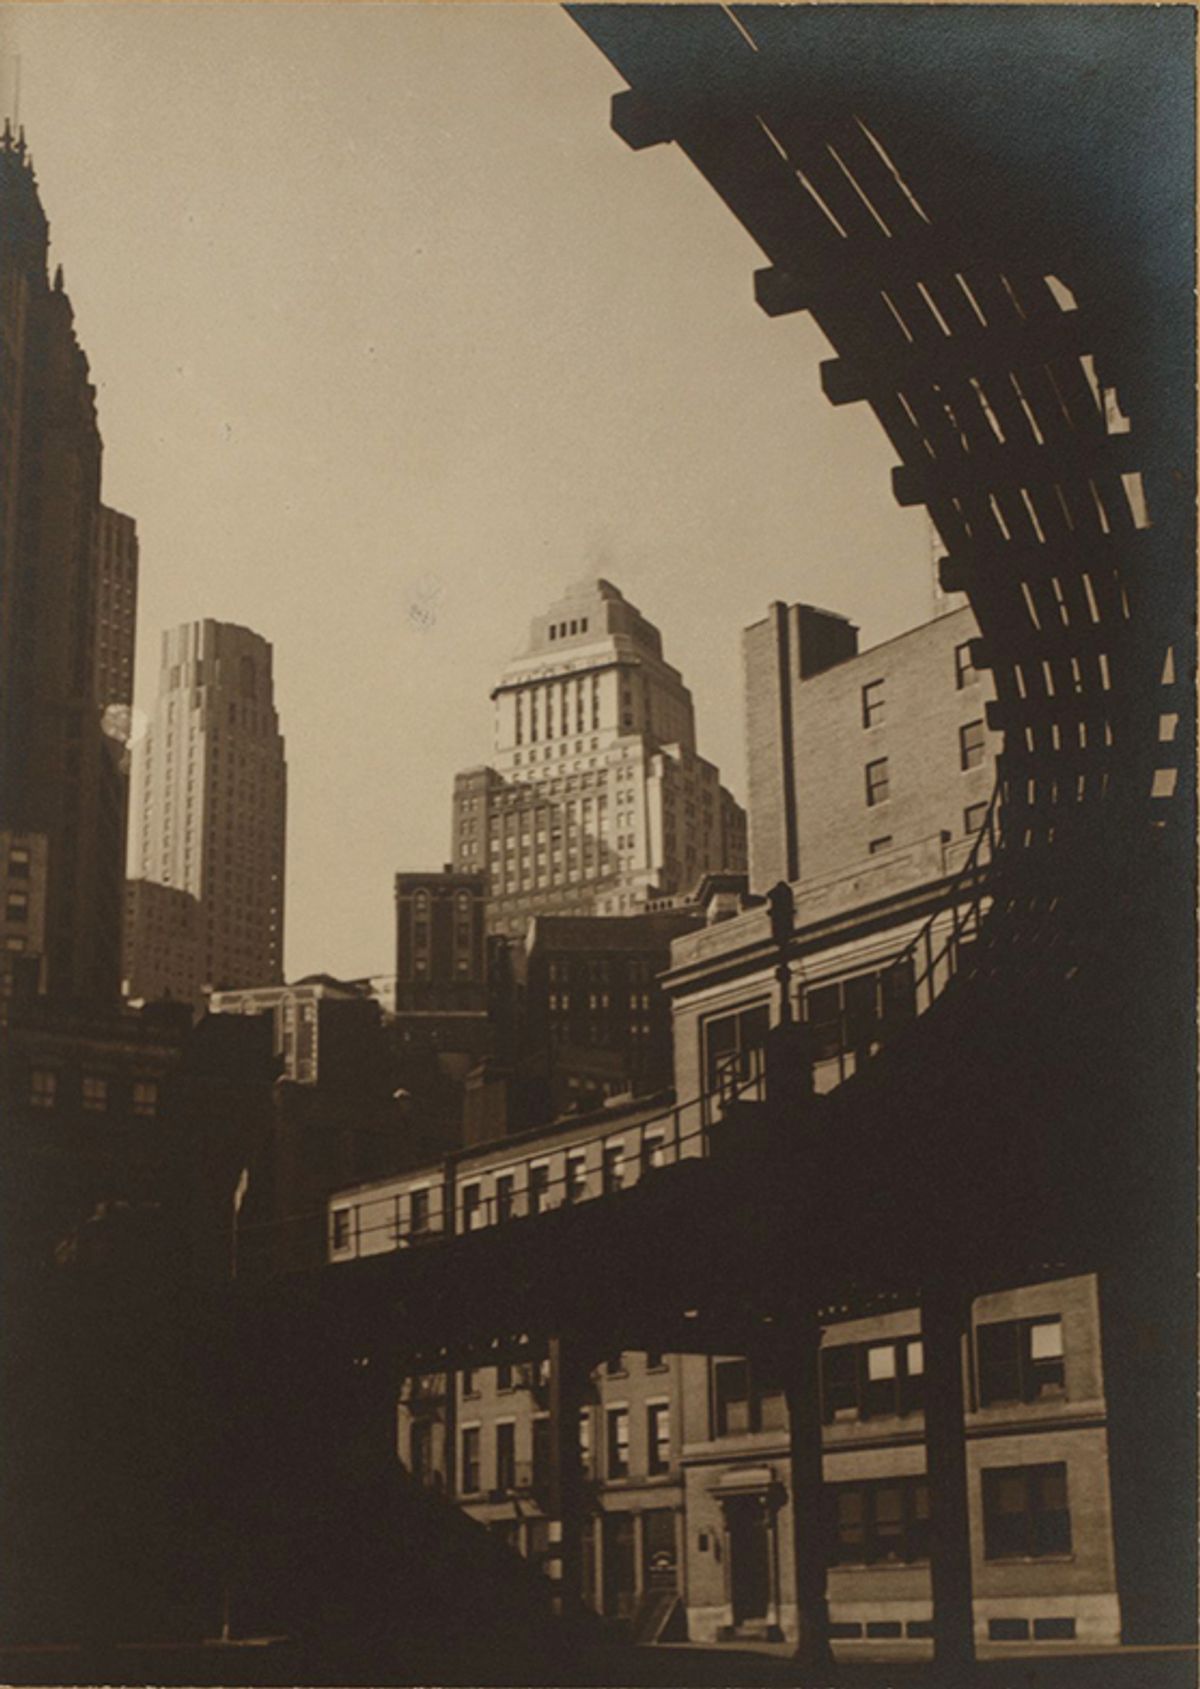 Water Street, Coenties Slip, in 1936; in the 1950s and 1960s artists moved into the area’s warehouses
New York Public Library


